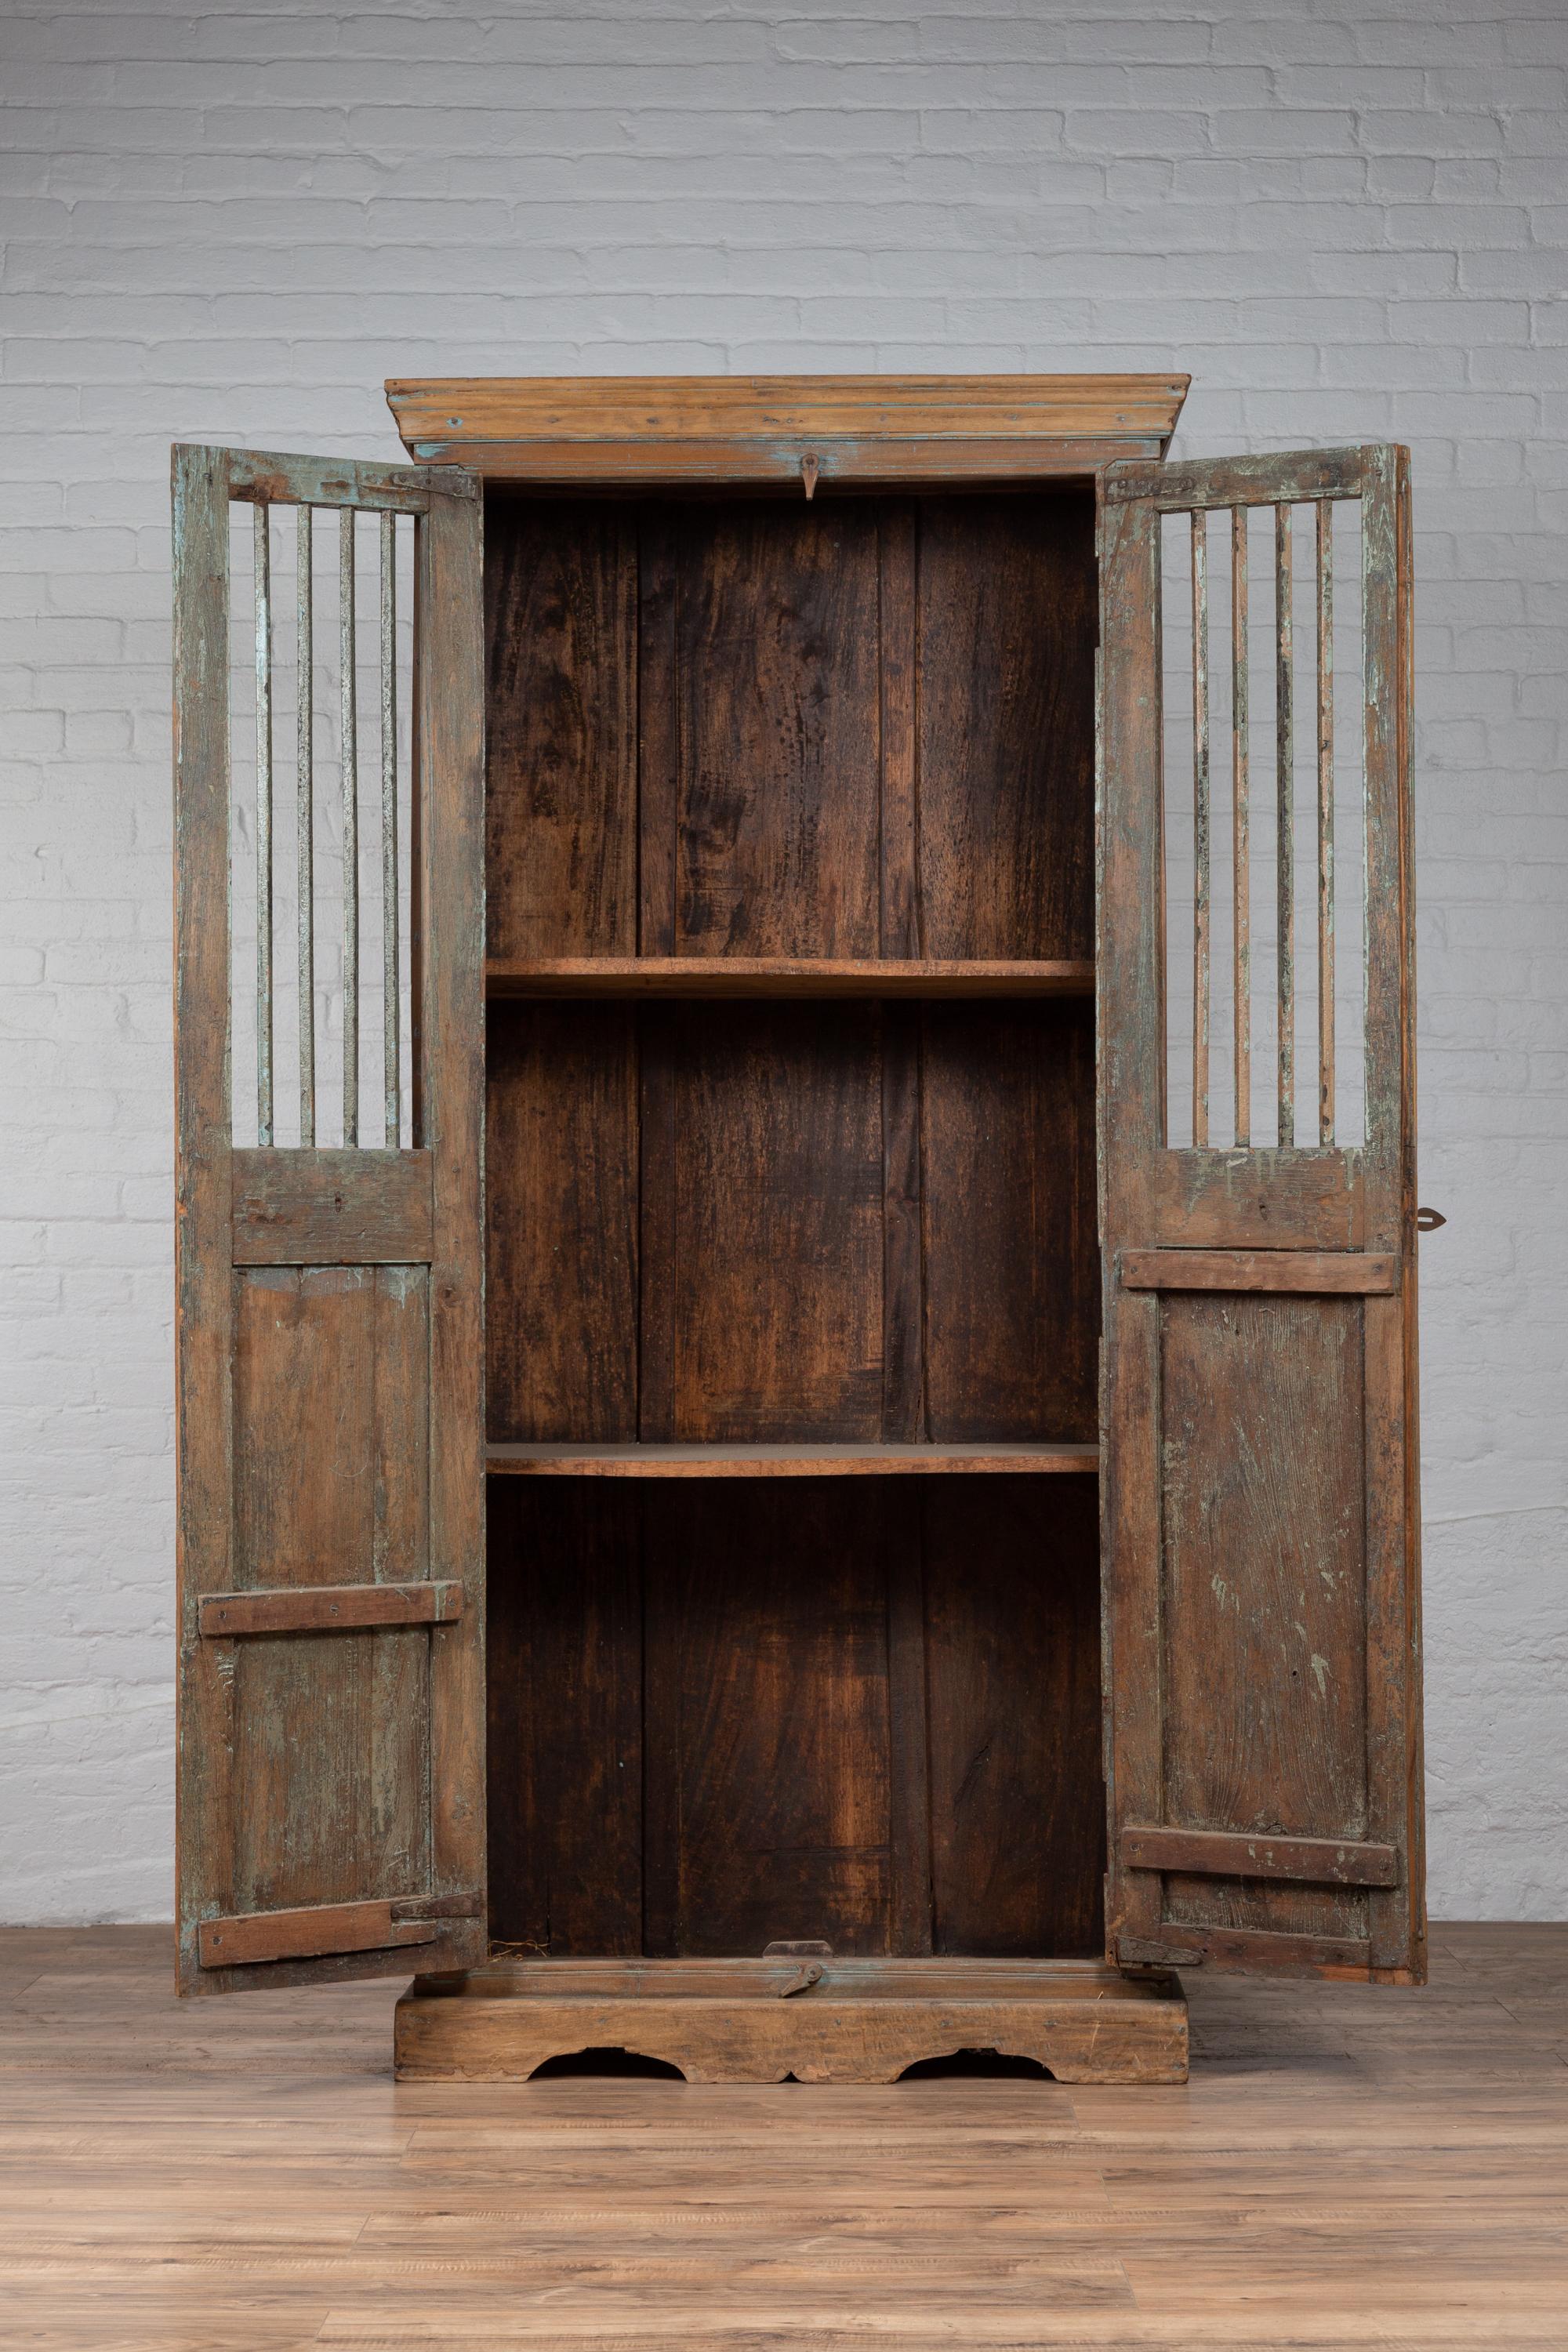 Early 20th Century Indian Rustic Wooden Kitchen Cabinet with Distressed Finish For Sale 2